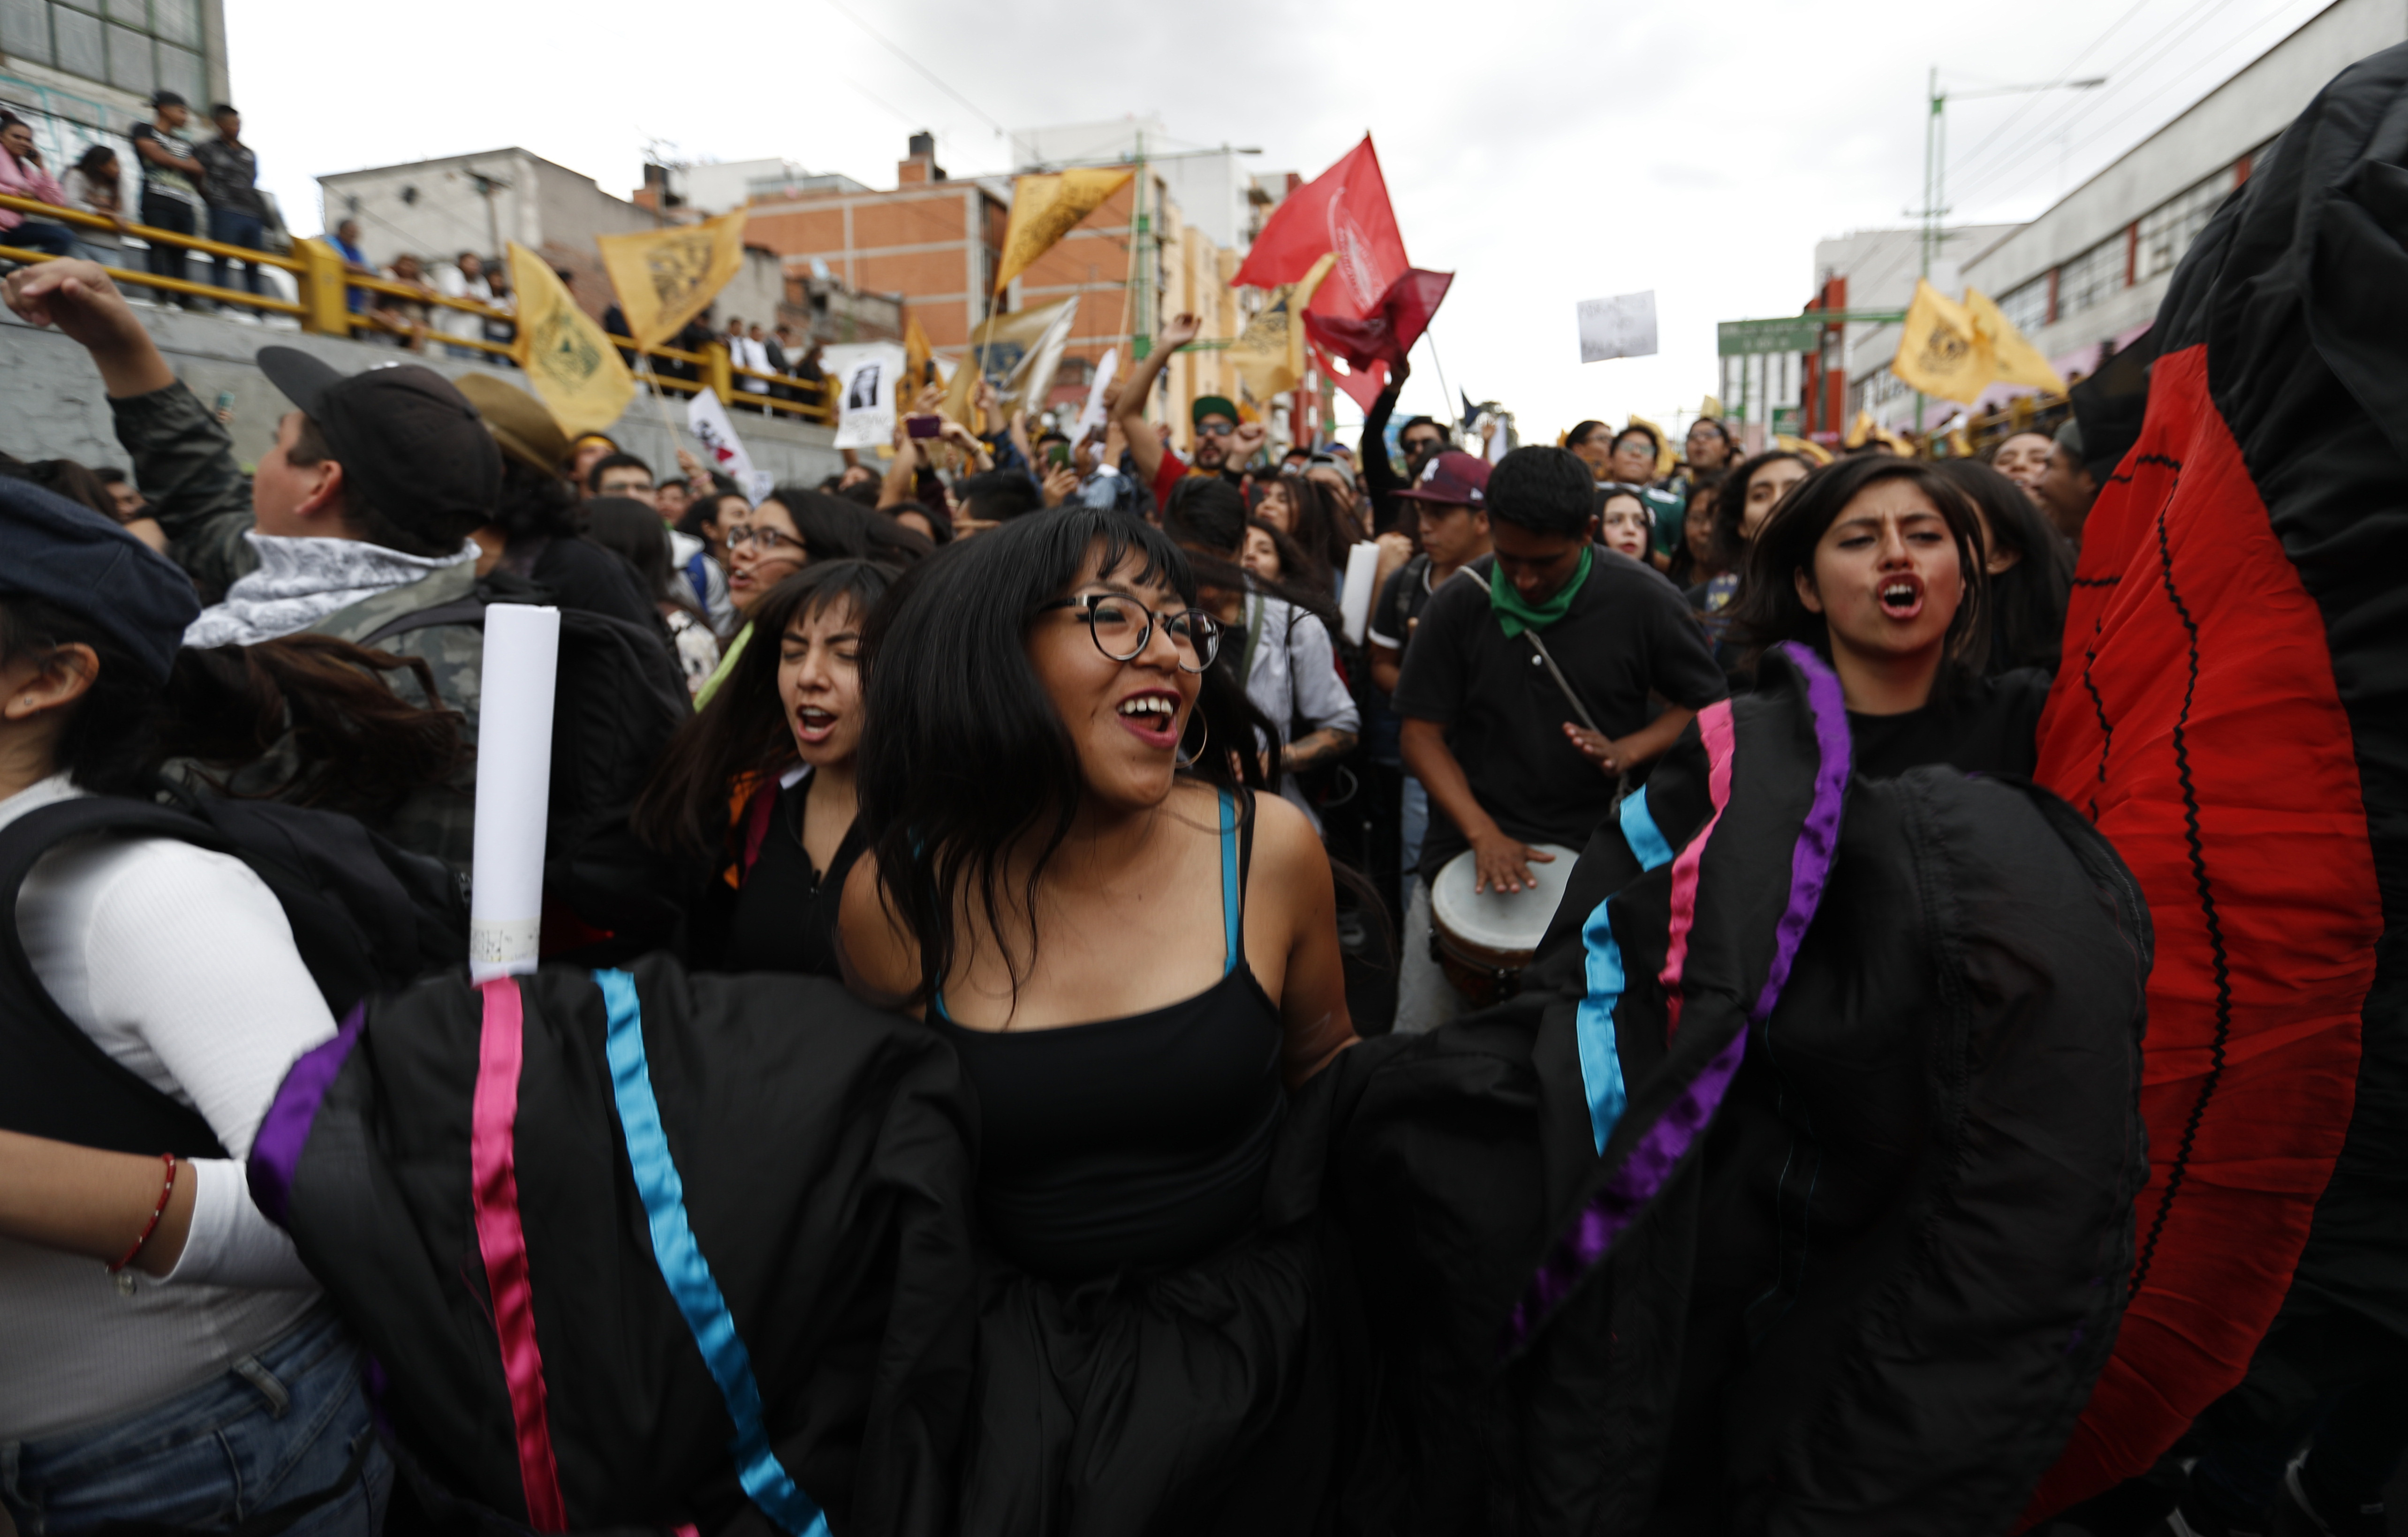 Demonstrators march in remembrance of the 1968 Tlatelolco student massacre in Mexico City, Tuesday, Oct. 2, 2018. Mexico is marking the massacre of student protesters by army troops 50 years ago. (AP Photo/Eduardo Verdugo)